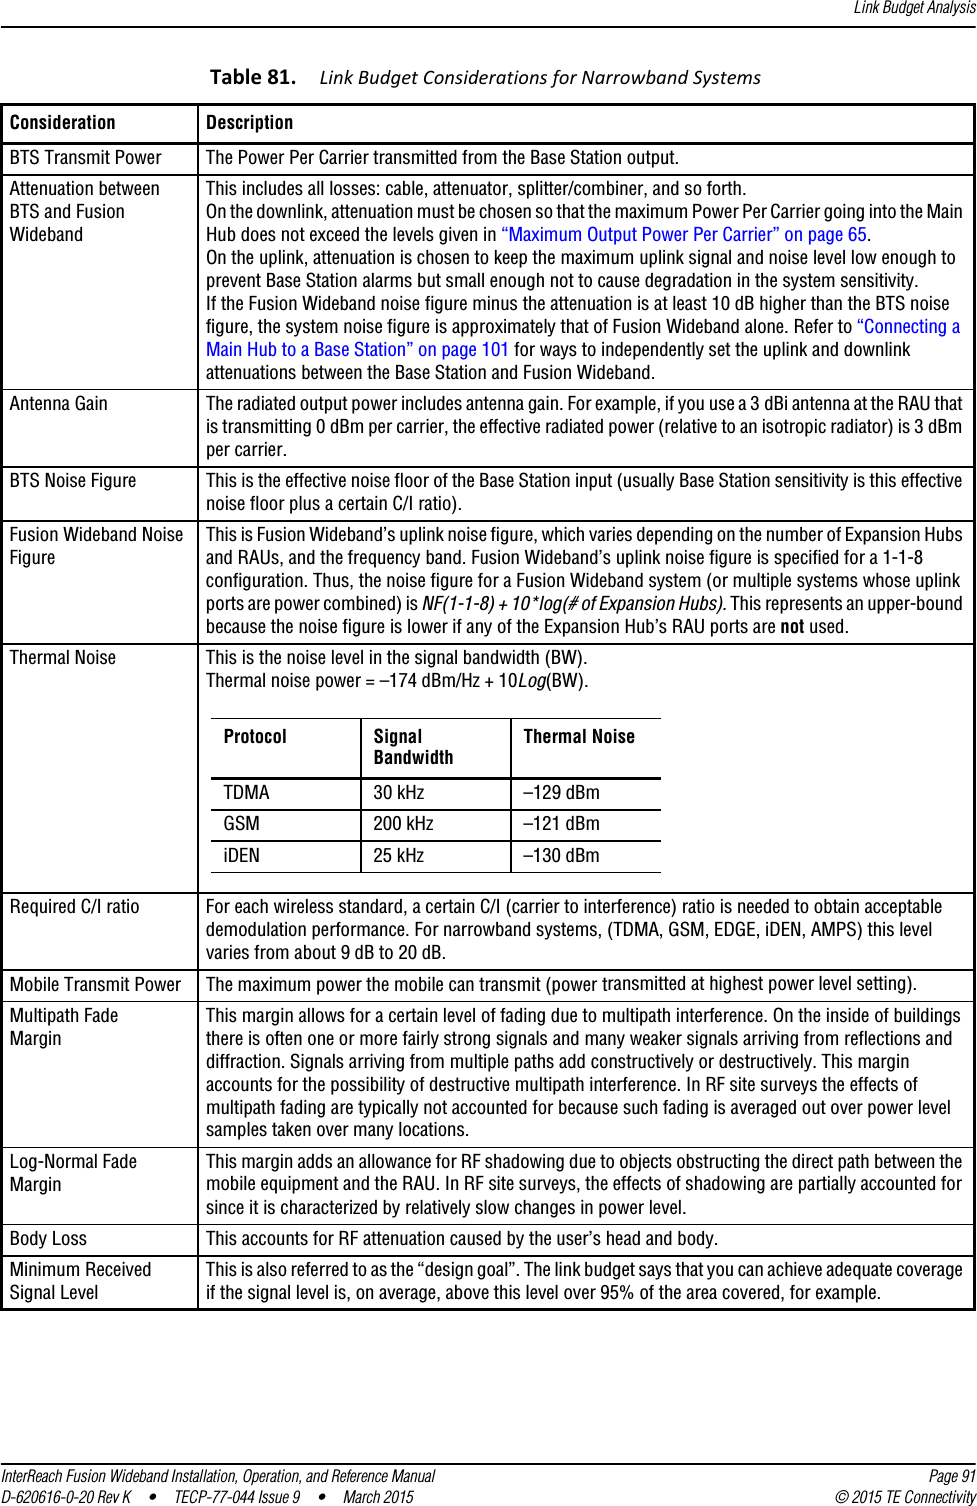 Link Budget AnalysisInterReach Fusion Wideband Installation, Operation, and Reference Manual Page 91D-620616-0-20 Rev K  •  TECP-77-044 Issue 9  •  March 2015 © 2015 TE ConnectivityTable 81. Link Budget Considerations for Narrowband Systems Consideration DescriptionBTS Transmit Power The Power Per Carrier transmitted from the Base Station output.Attenuation between BTS and Fusion  WidebandThis includes all losses: cable, attenuator, splitter/combiner, and so forth. On the downlink, attenuation must be chosen so that the maximum Power Per Carrier going into the Main Hub does not exceed the levels given in “Maximum Output Power Per Carrier” on page 65. On the uplink, attenuation is chosen to keep the maximum uplink signal and noise level low enough to prevent Base Station alarms but small enough not to cause degradation in the system sensitivity.If the Fusion Wideband noise figure minus the attenuation is at least 10 dB higher than the BTS noise figure, the system noise figure is approximately that of Fusion Wideband alone. Refer to “Connecting a Main Hub to a Base Station” on page 101 for ways to independently set the uplink and downlink attenuations between the Base Station and Fusion Wideband.Antenna Gain The radiated output power includes antenna gain. For example, if you use a 3 dBi antenna at the RAU that is transmitting 0 dBm per carrier, the effective radiated power (relative to an isotropic radiator) is 3 dBm per carrier.BTS Noise Figure This is the effective noise floor of the Base Station input (usually Base Station sensitivity is this effective noise floor plus a certain C/I ratio).Fusion Wideband Noise FigureThis is Fusion Wideband’s uplink noise figure, which varies depending on the number of Expansion Hubs and RAUs, and the frequency band. Fusion Wideband’s uplink noise figure is specified for a 1-1-8 configuration. Thus, the noise figure for a Fusion Wideband system (or multiple systems whose uplink ports are power combined) is NF(1-1-8) + 10*log(# of Expansion Hubs). This represents an upper-bound because the noise figure is lower if any of the Expansion Hub’s RAU ports are not used.Thermal Noise This is the noise level in the signal bandwidth (BW). Thermal noise power = –174 dBm/Hz + 10Log(BW).Required C/I ratio For each wireless standard, a certain C/I (carrier to interference) ratio is needed to obtain acceptable demodulation performance. For narrowband systems, (TDMA, GSM, EDGE, iDEN, AMPS) this level varies from about 9 dB to 20 dB.Mobile Transmit Power The maximum power the mobile can transmit (power transmitted at highest power level setting).Multipath Fade  MarginThis margin allows for a certain level of fading due to multipath interference. On the inside of buildings there is often one or more fairly strong signals and many weaker signals arriving from reflections and diffraction. Signals arriving from multiple paths add constructively or destructively. This margin accounts for the possibility of destructive multipath interference. In RF site surveys the effects of multipath fading are typically not accounted for because such fading is averaged out over power level samples taken over many locations.Log-Normal Fade  MarginThis margin adds an allowance for RF shadowing due to objects obstructing the direct path between the mobile equipment and the RAU. In RF site surveys, the effects of shadowing are partially accounted for since it is characterized by relatively slow changes in power level.Body Loss This accounts for RF attenuation caused by the user’s head and body.Minimum Received Signal LevelThis is also referred to as the “design goal”. The link budget says that you can achieve adequate coverage if the signal level is, on average, above this level over 95% of the area covered, for example.Protocol Signal BandwidthThermal NoiseTDMA 30 kHz –129 dBmGSM 200 kHz –121 dBmiDEN 25 kHz –130 dBm